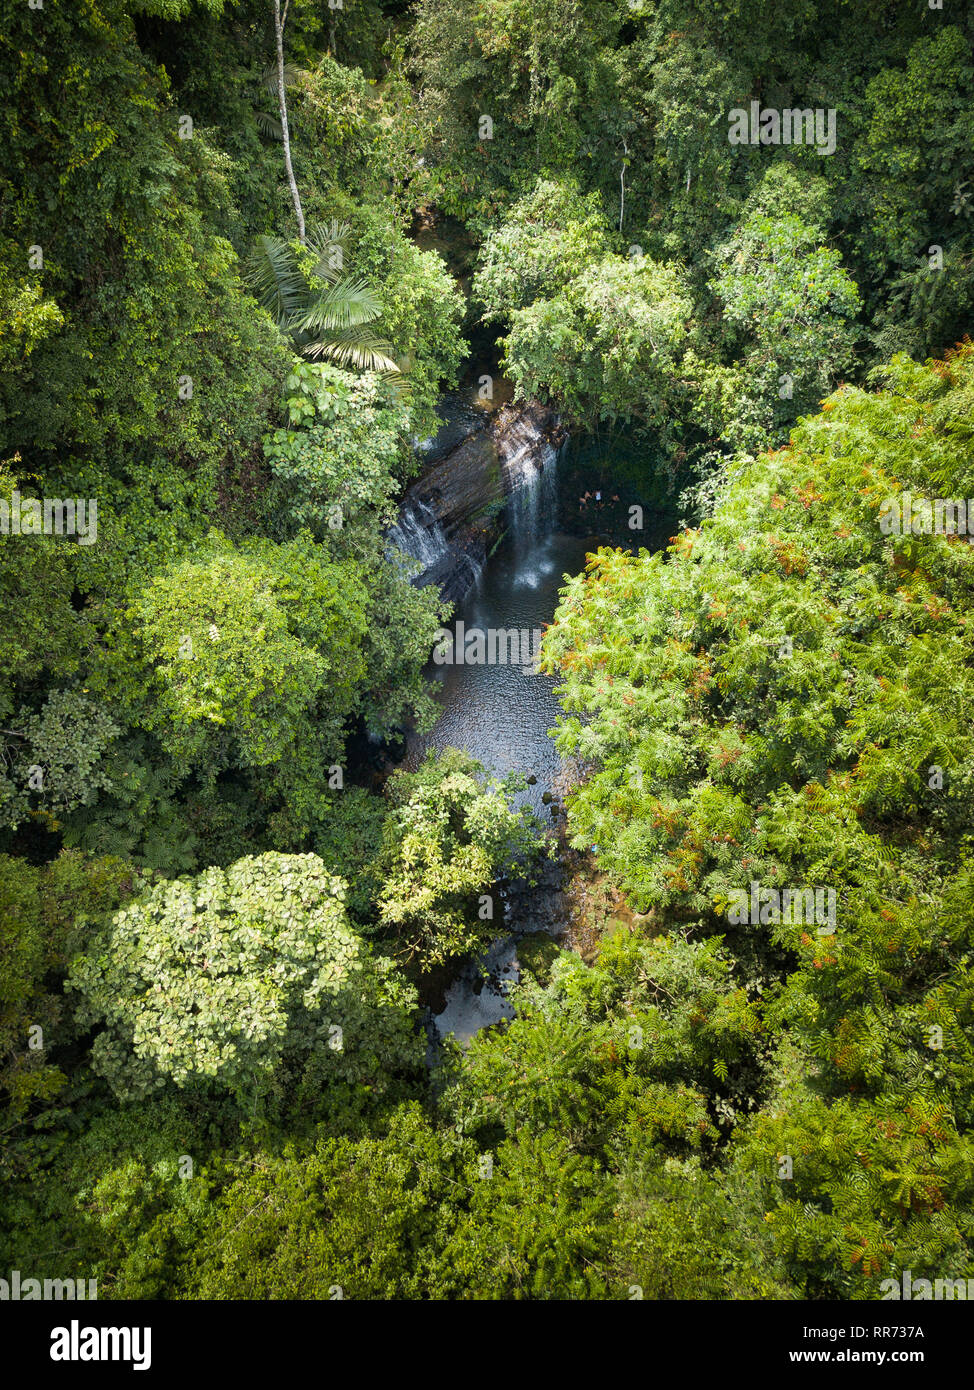 North Sumatra, Indonesia. 24th Feb, 2019. People swing from a vine into a waterfall in the forest to cool off in the 40C heat. Credit: Andrew Walmsley/Alamy Live News Stock Photo